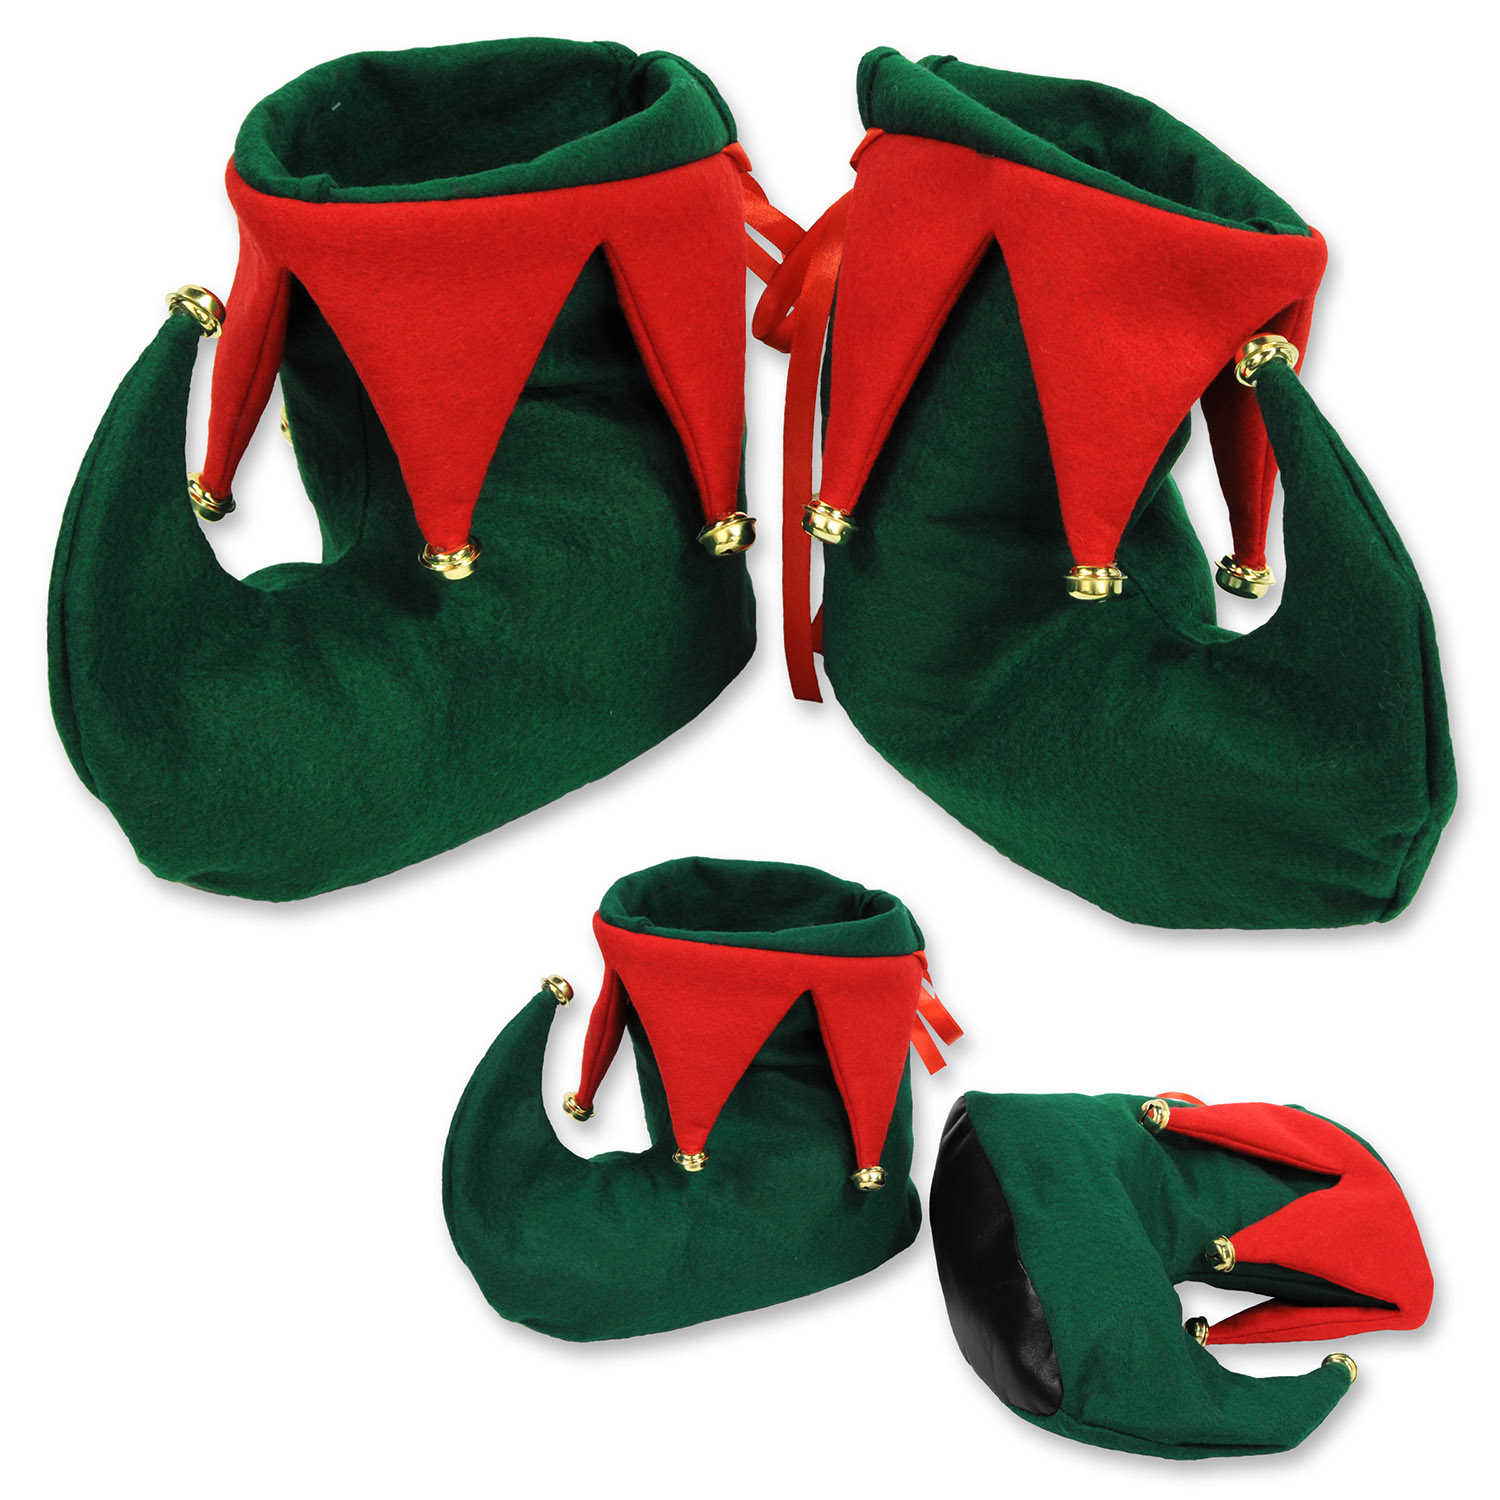 12 Wholesale Elf Boots One Size Fits Most; Indoor Use Only